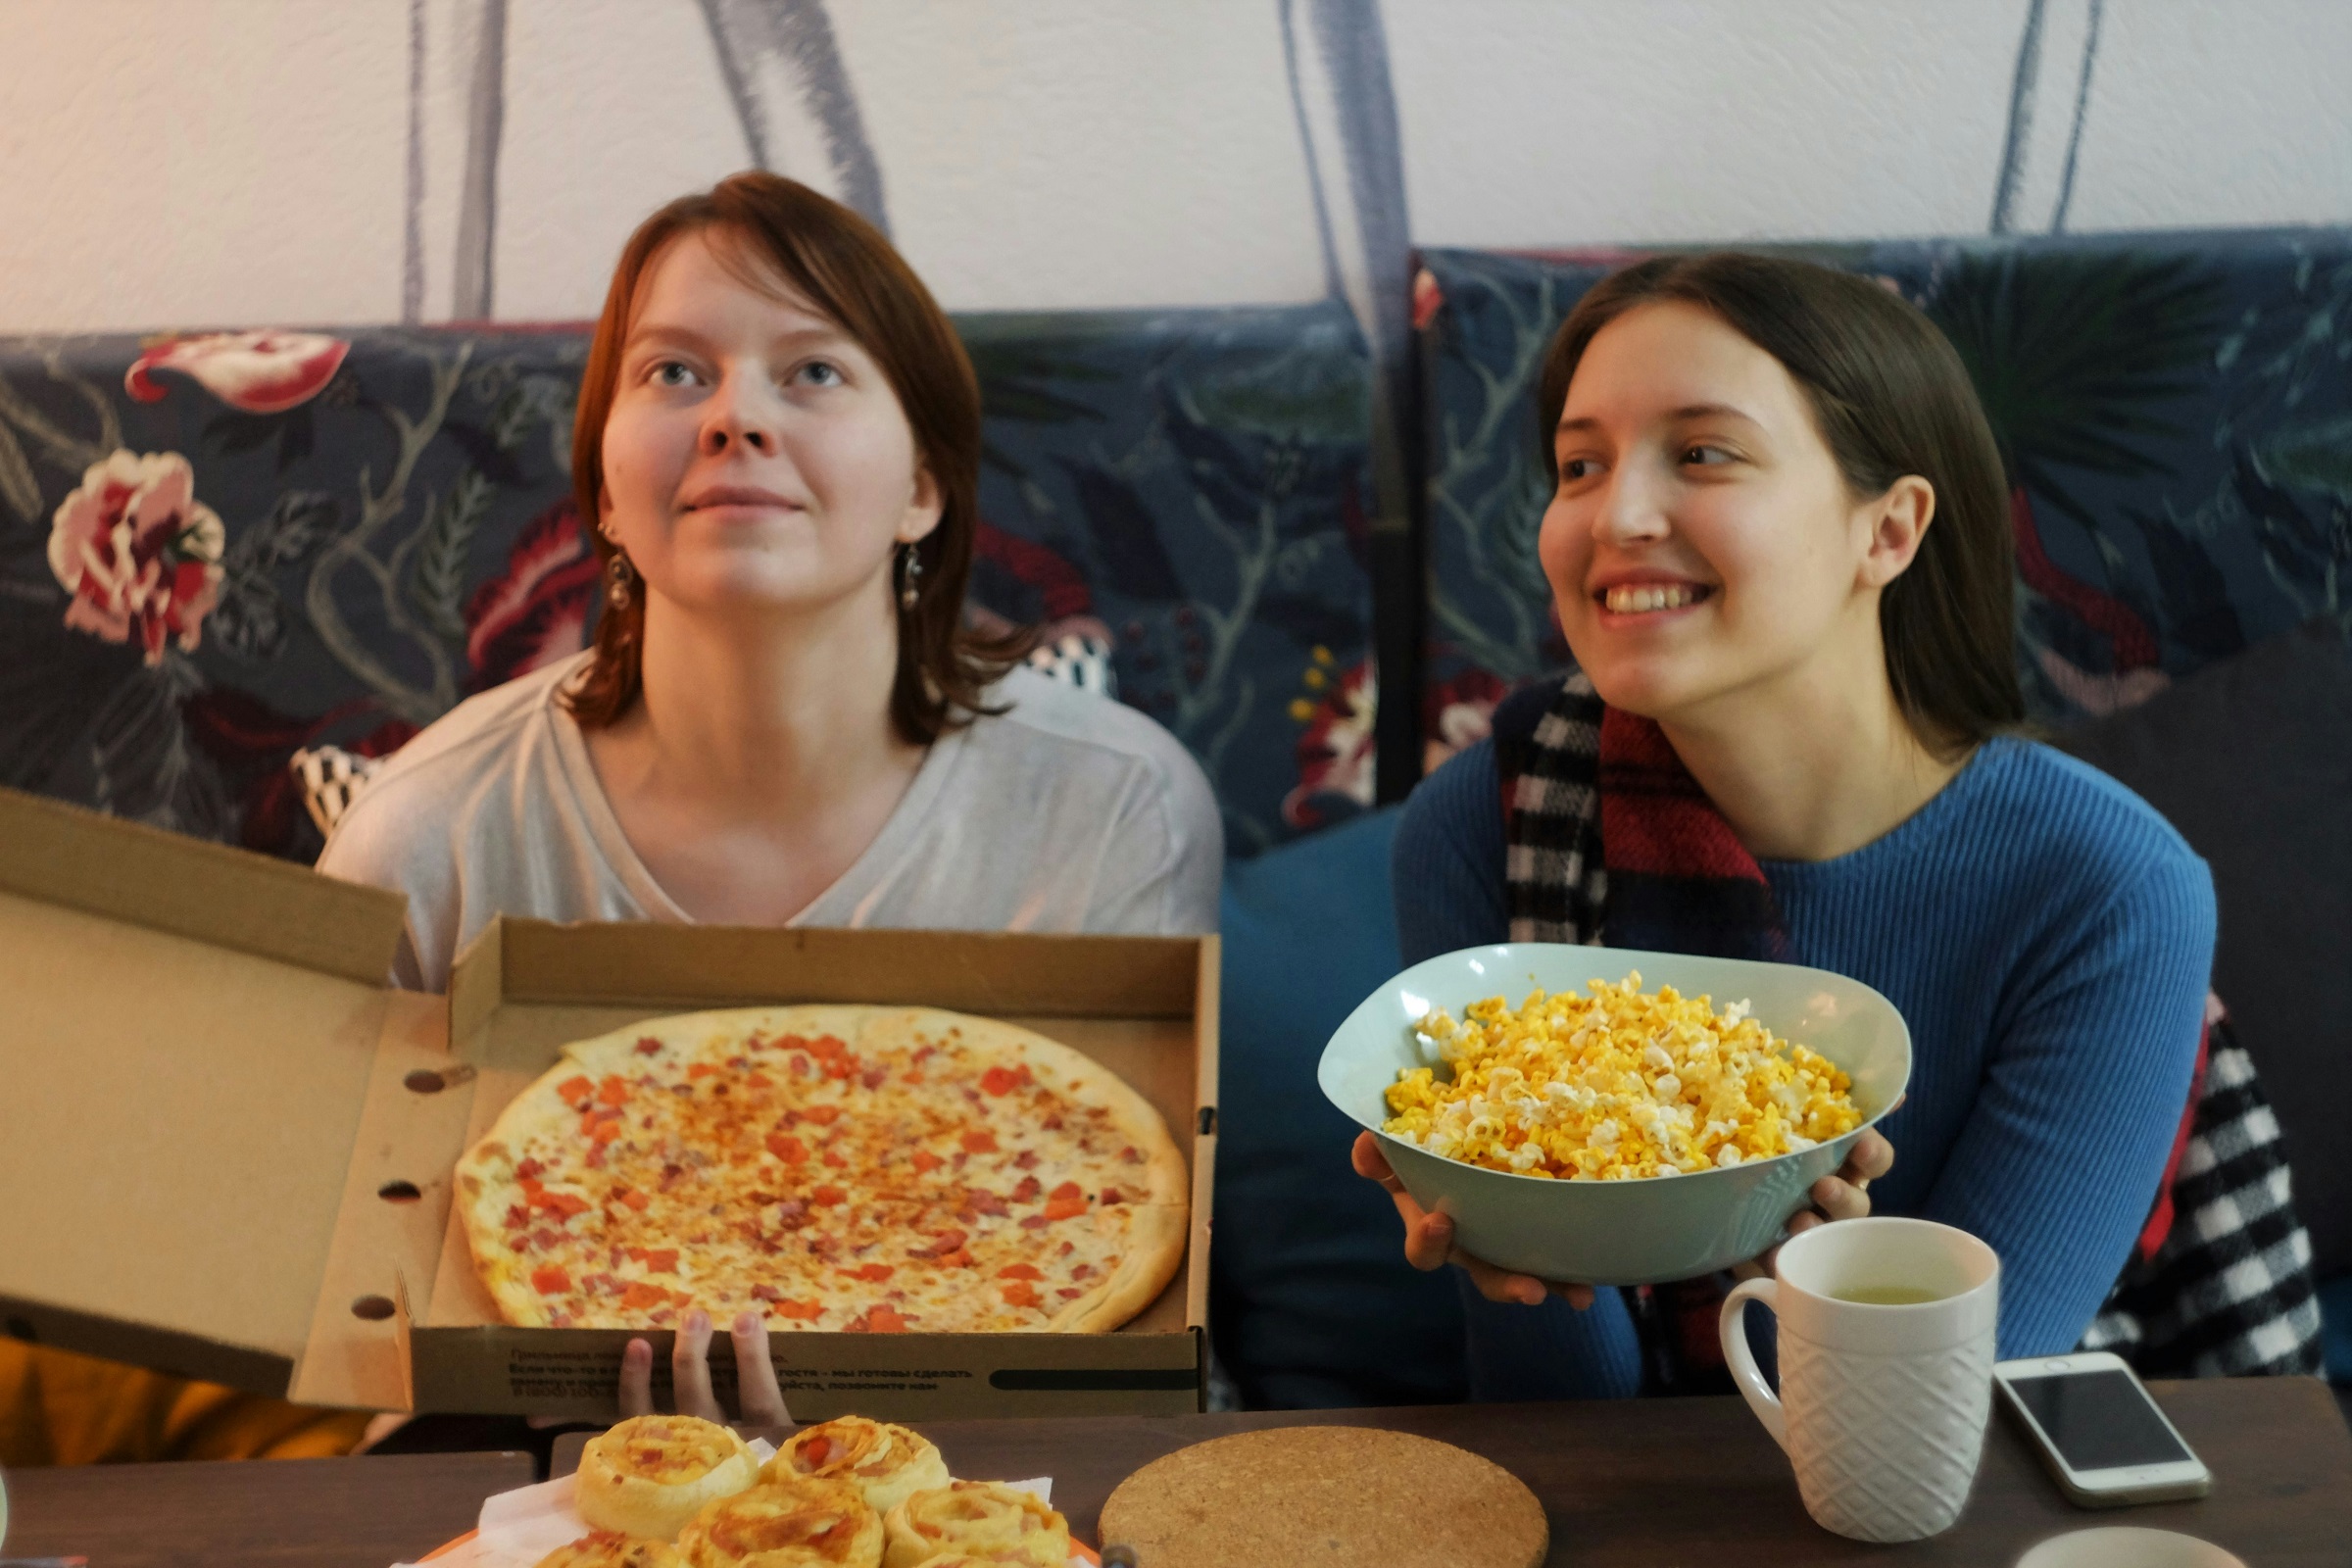 Two friends sit on a couch watching a movie. One holds a pizza box and the other holds a bowl of popcorn.